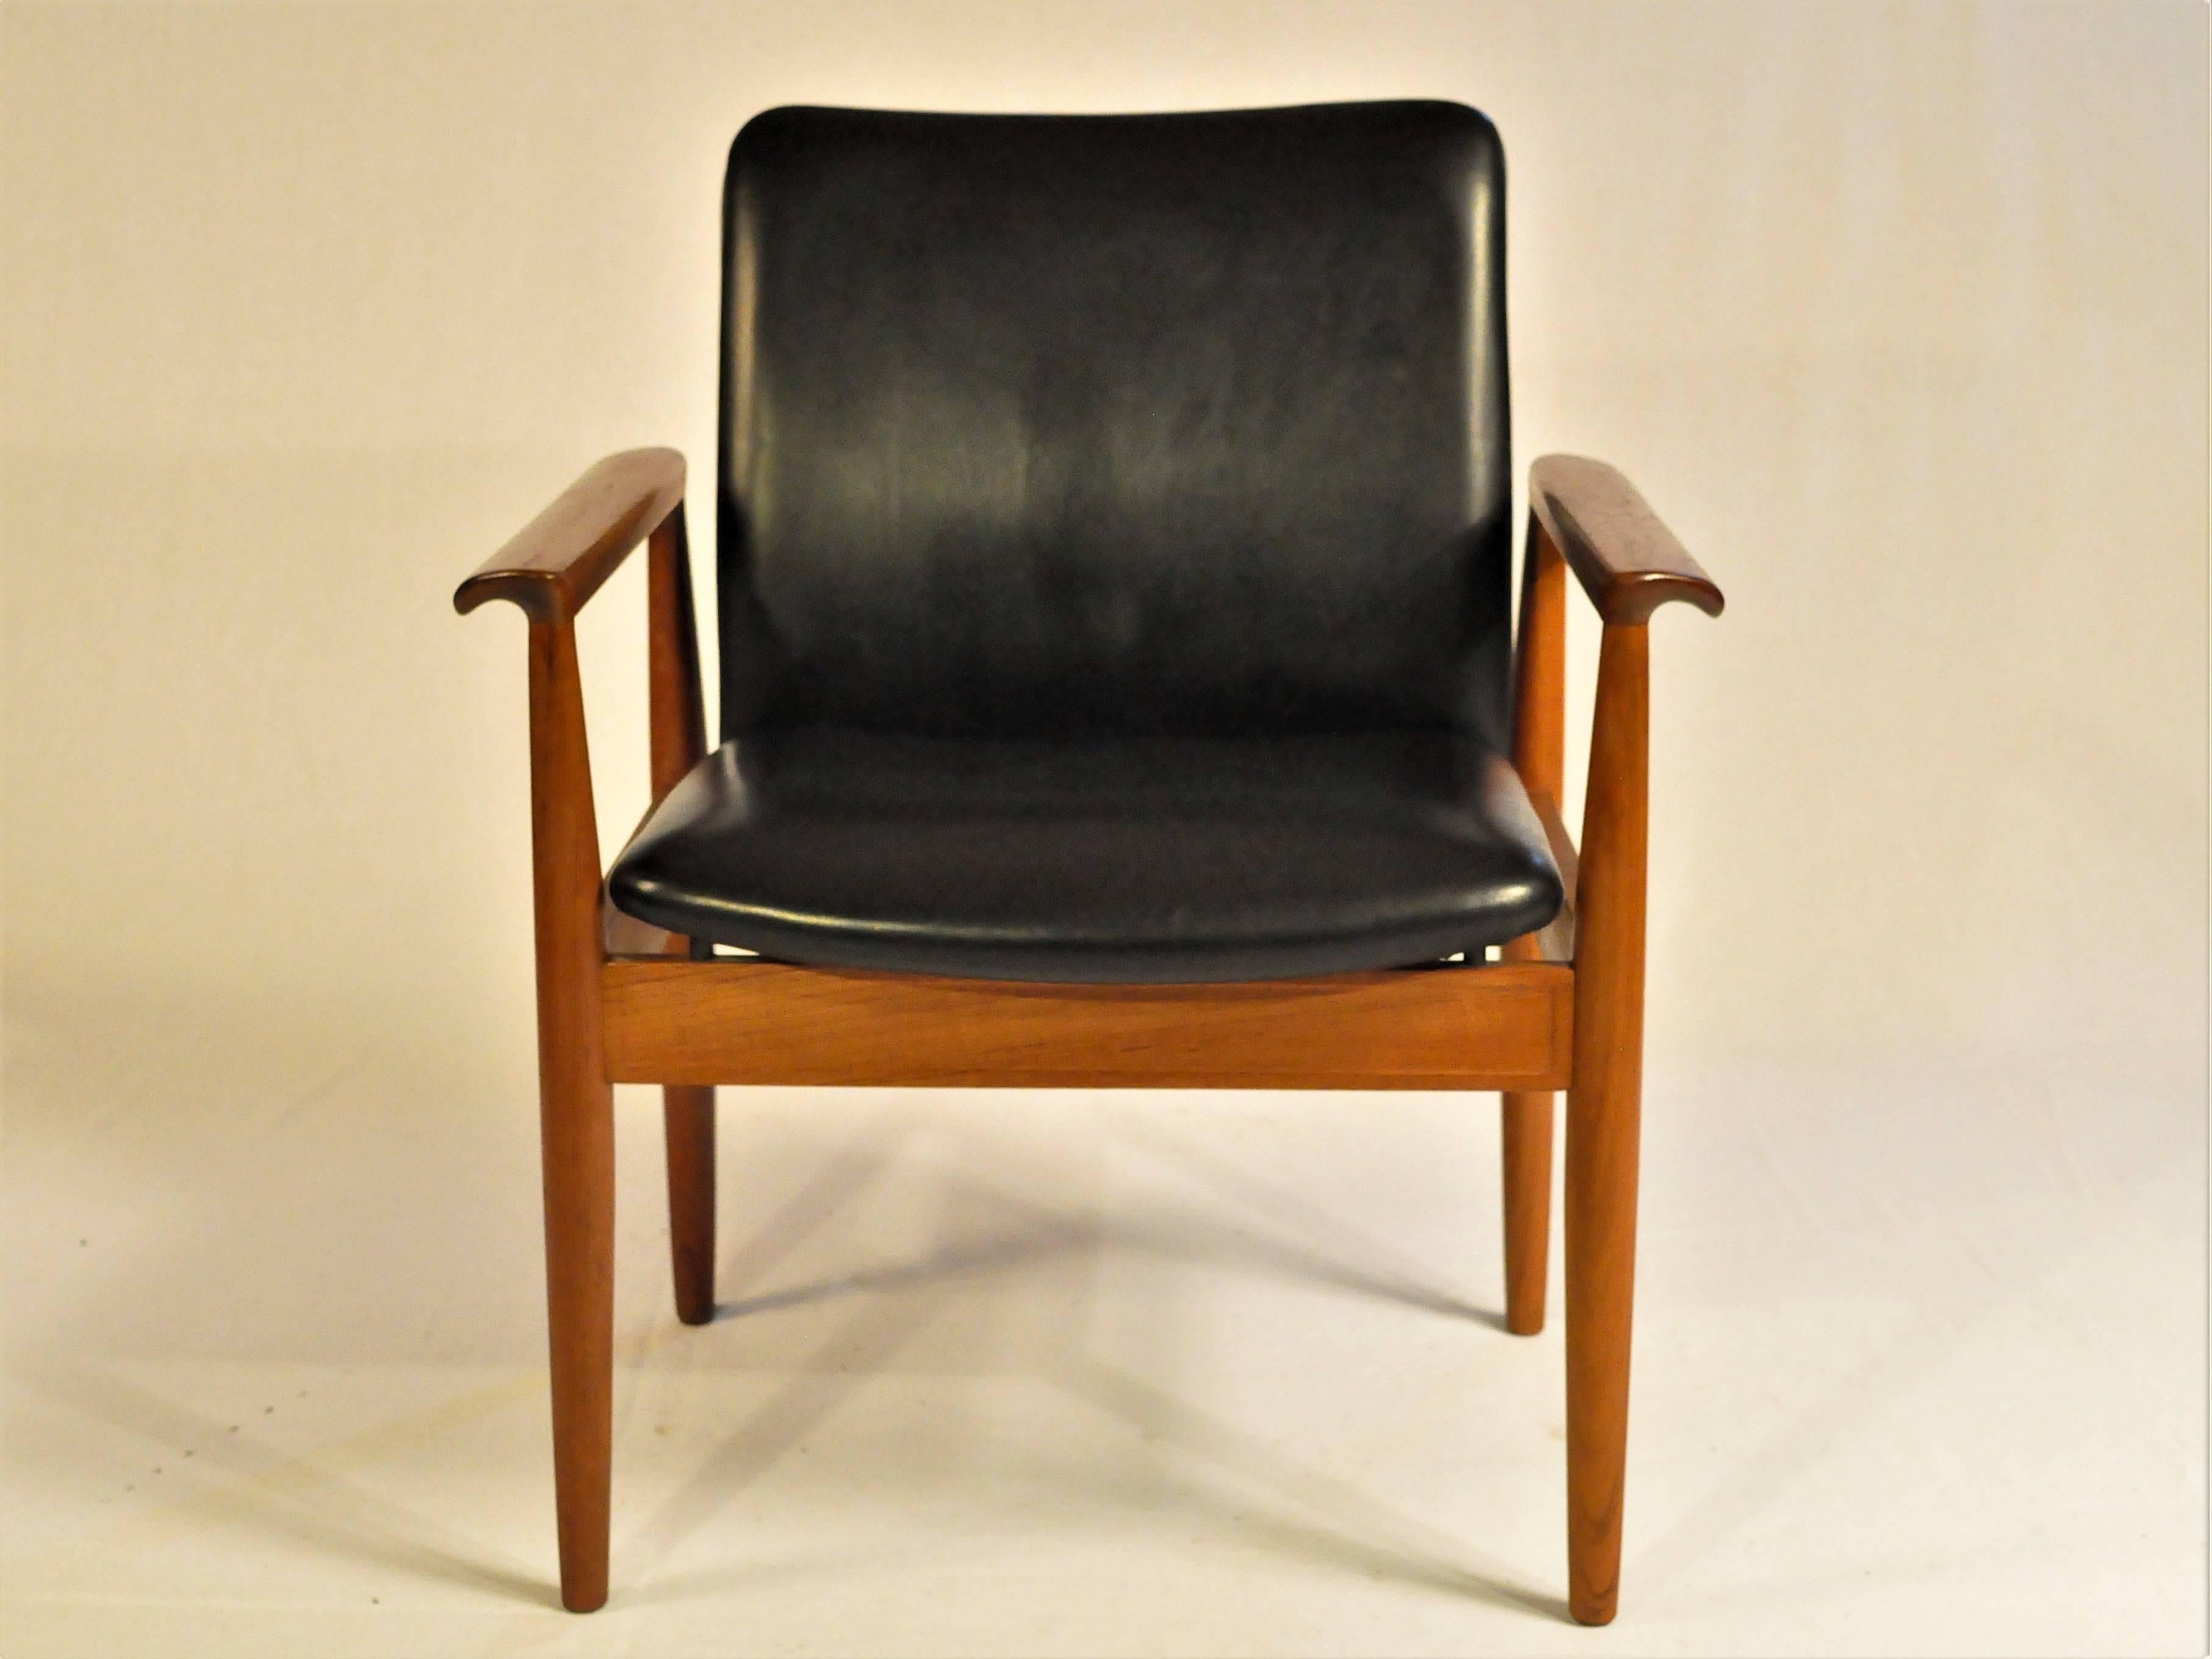 6 Finn Juhl armchairs in Bangkok teak an black leather designed in 1963 and made by France and Son / Cado in the 1960s

The armchairs have a solid stabile frame in teak and seats in black leather with deep foam that make them very comfortable.